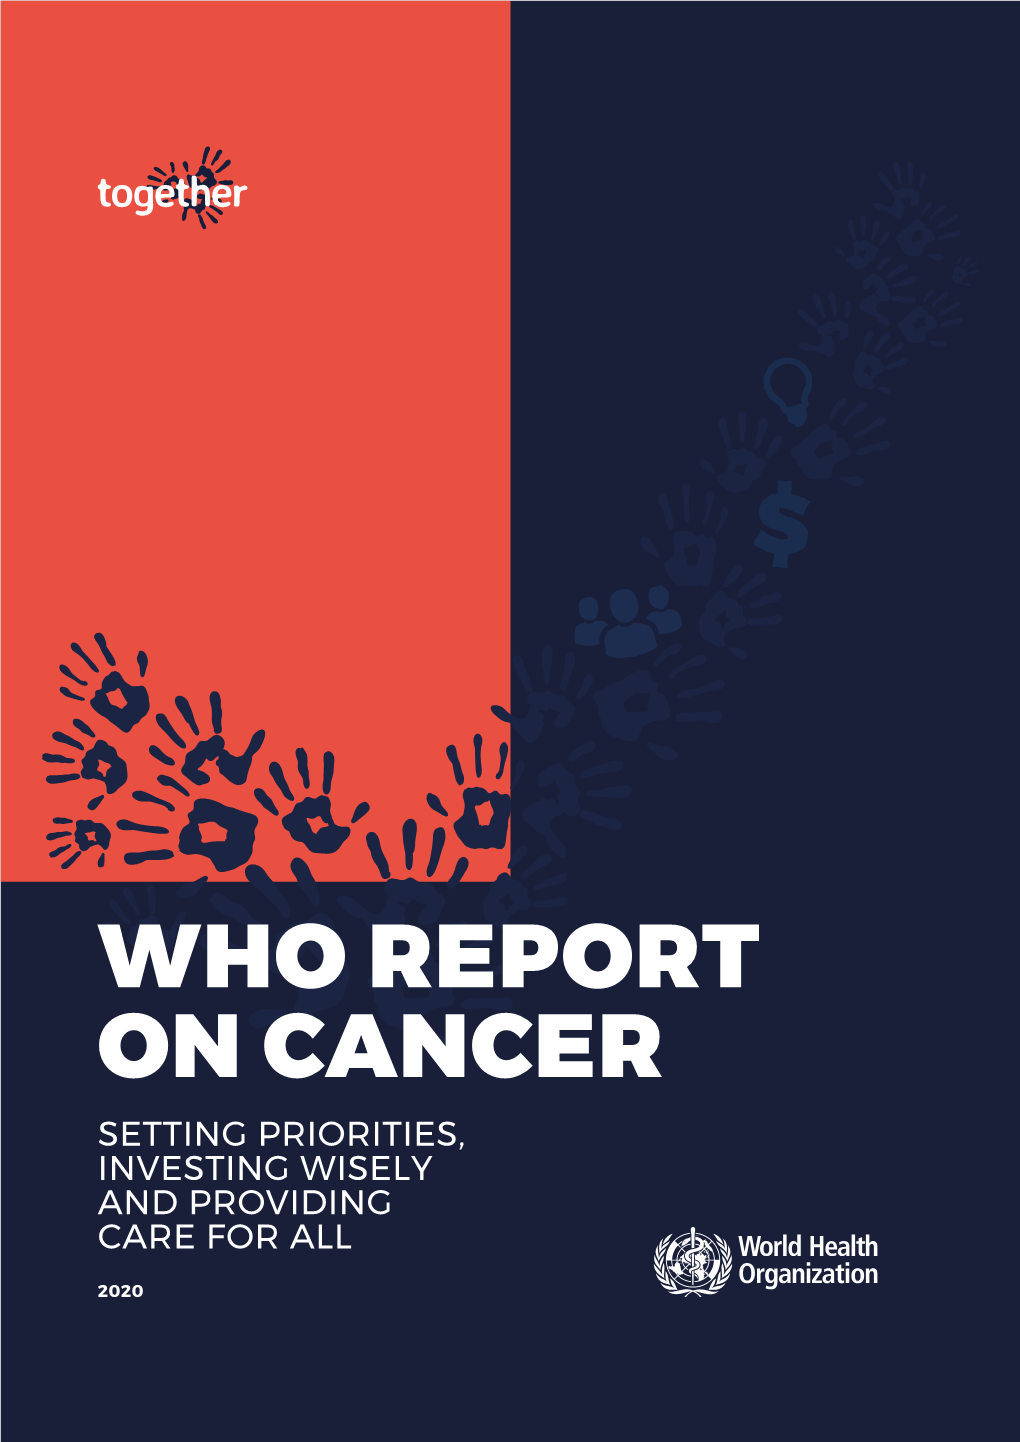 Who Report on Cancer Setting Priorities, Investing Wisely and Providing Care for All